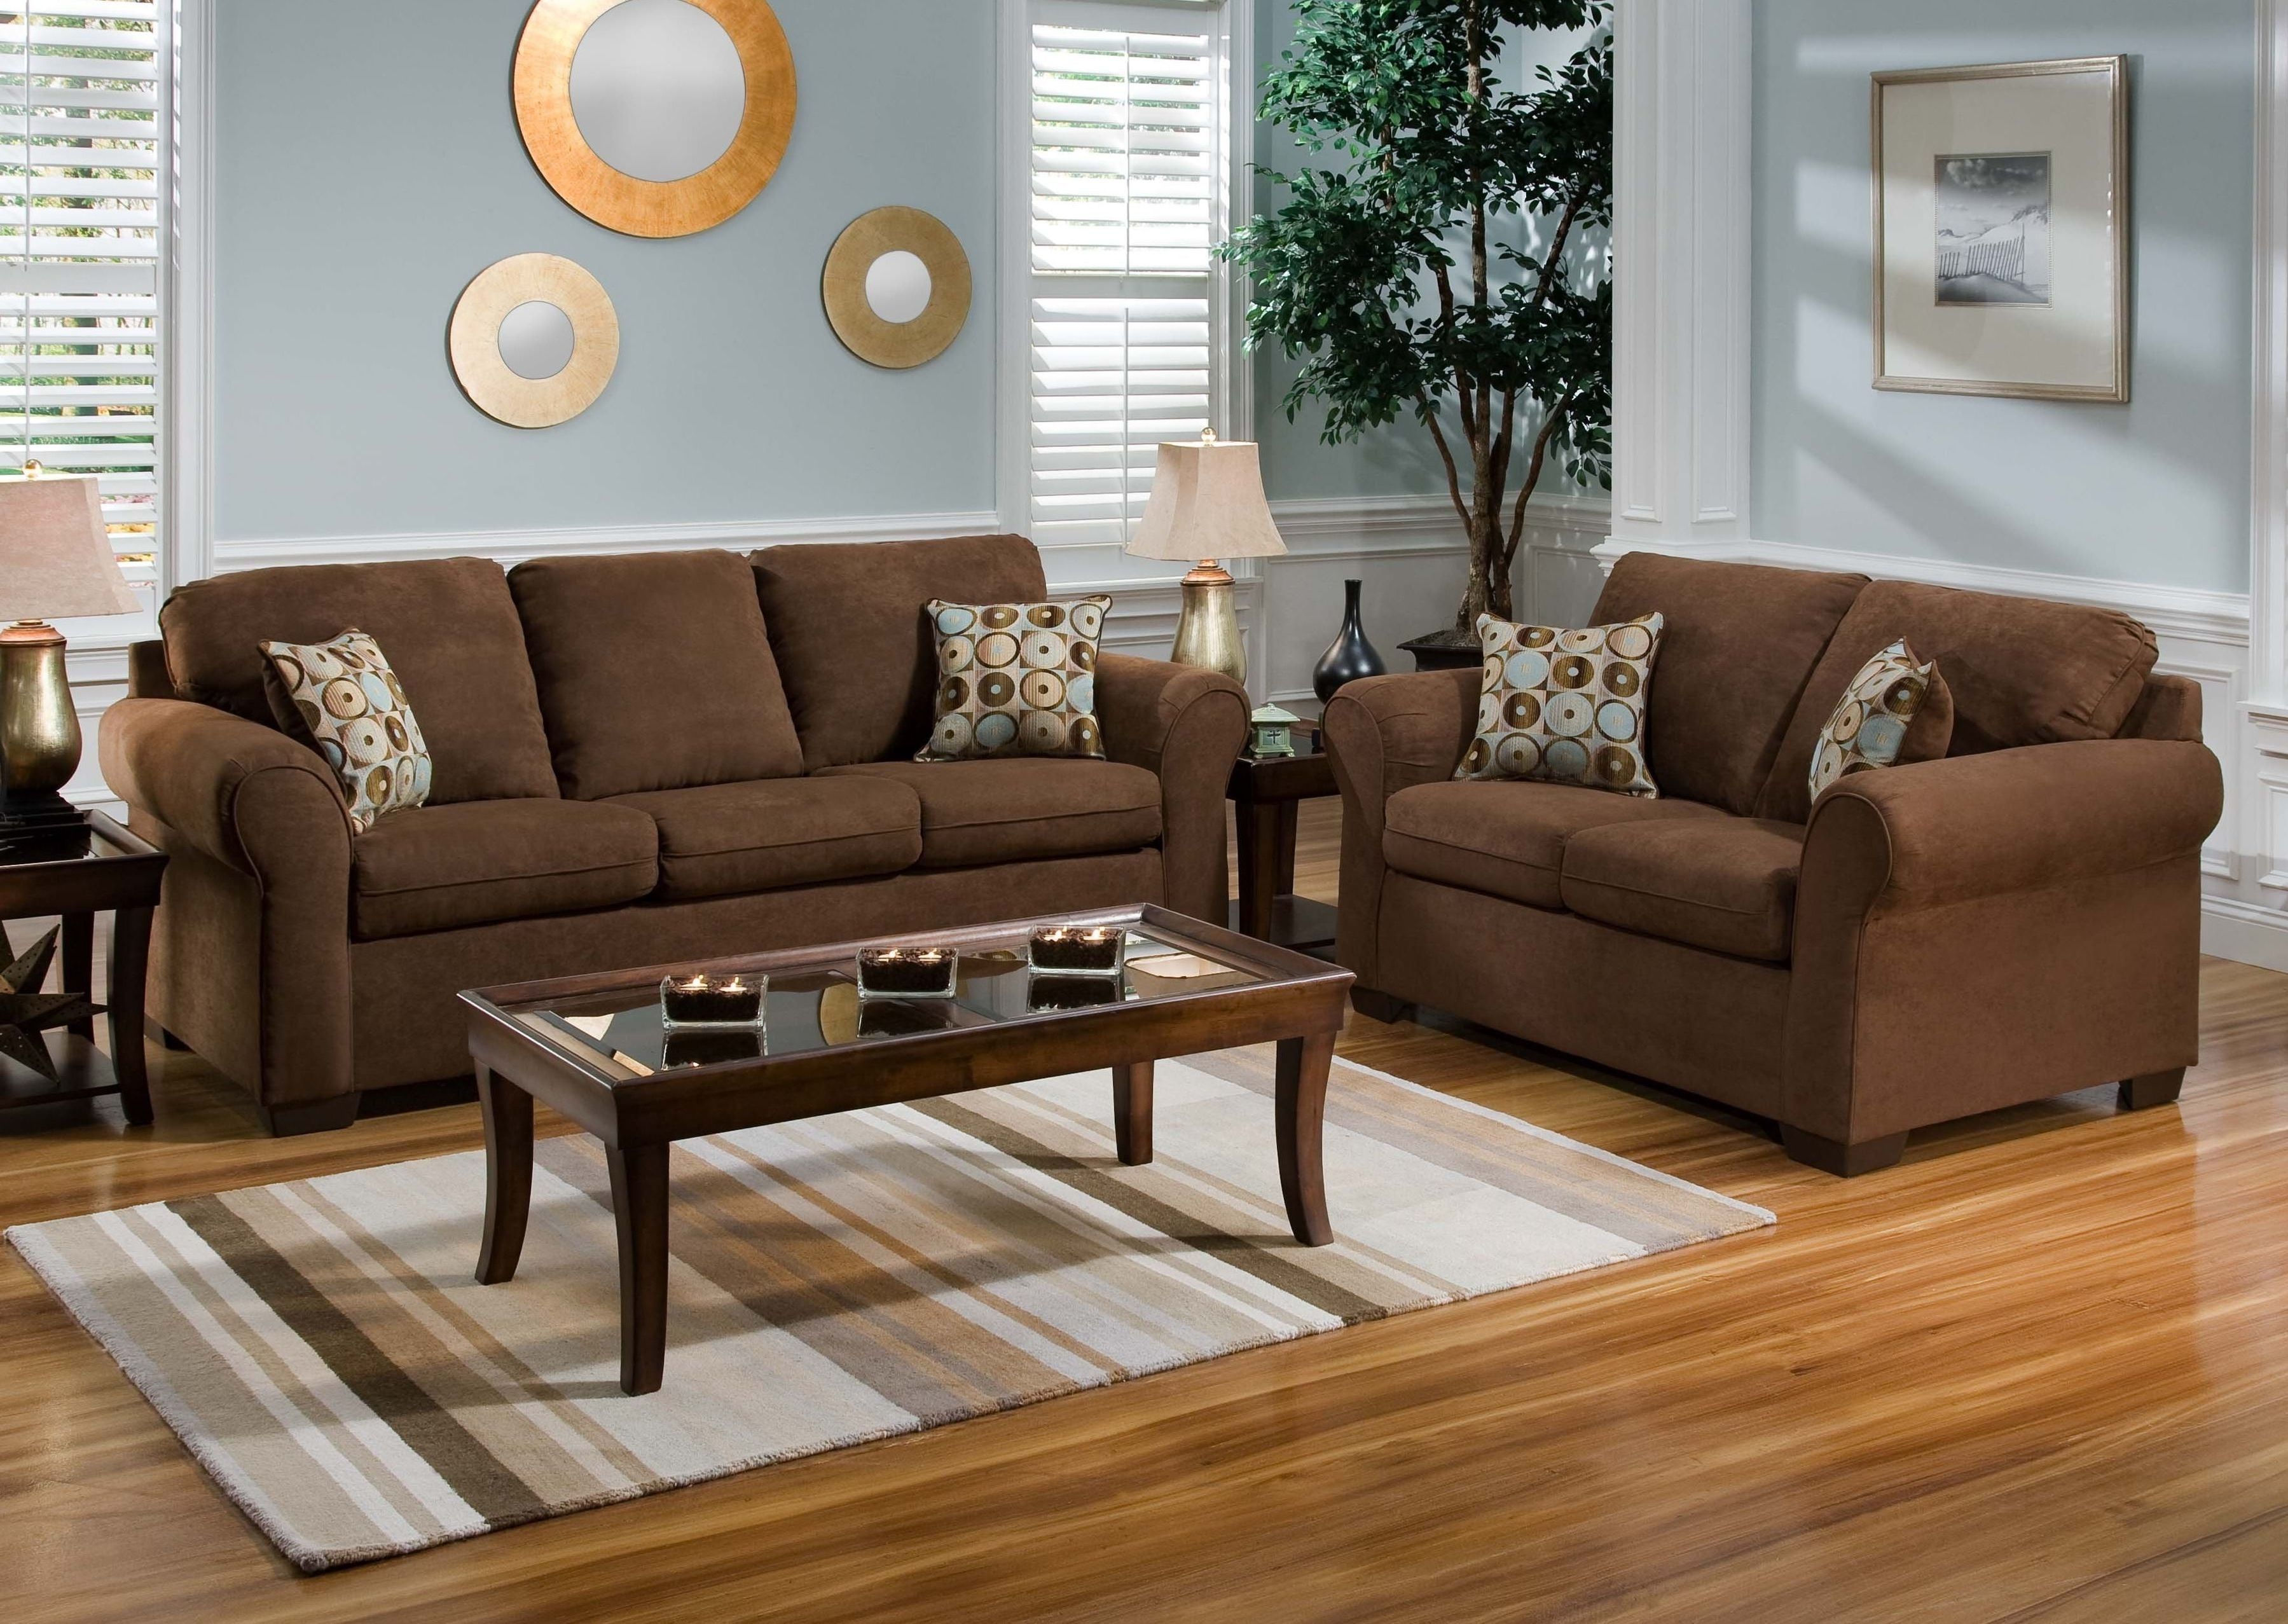 Living Room Wall Colors With Chocolate Brown Furniture